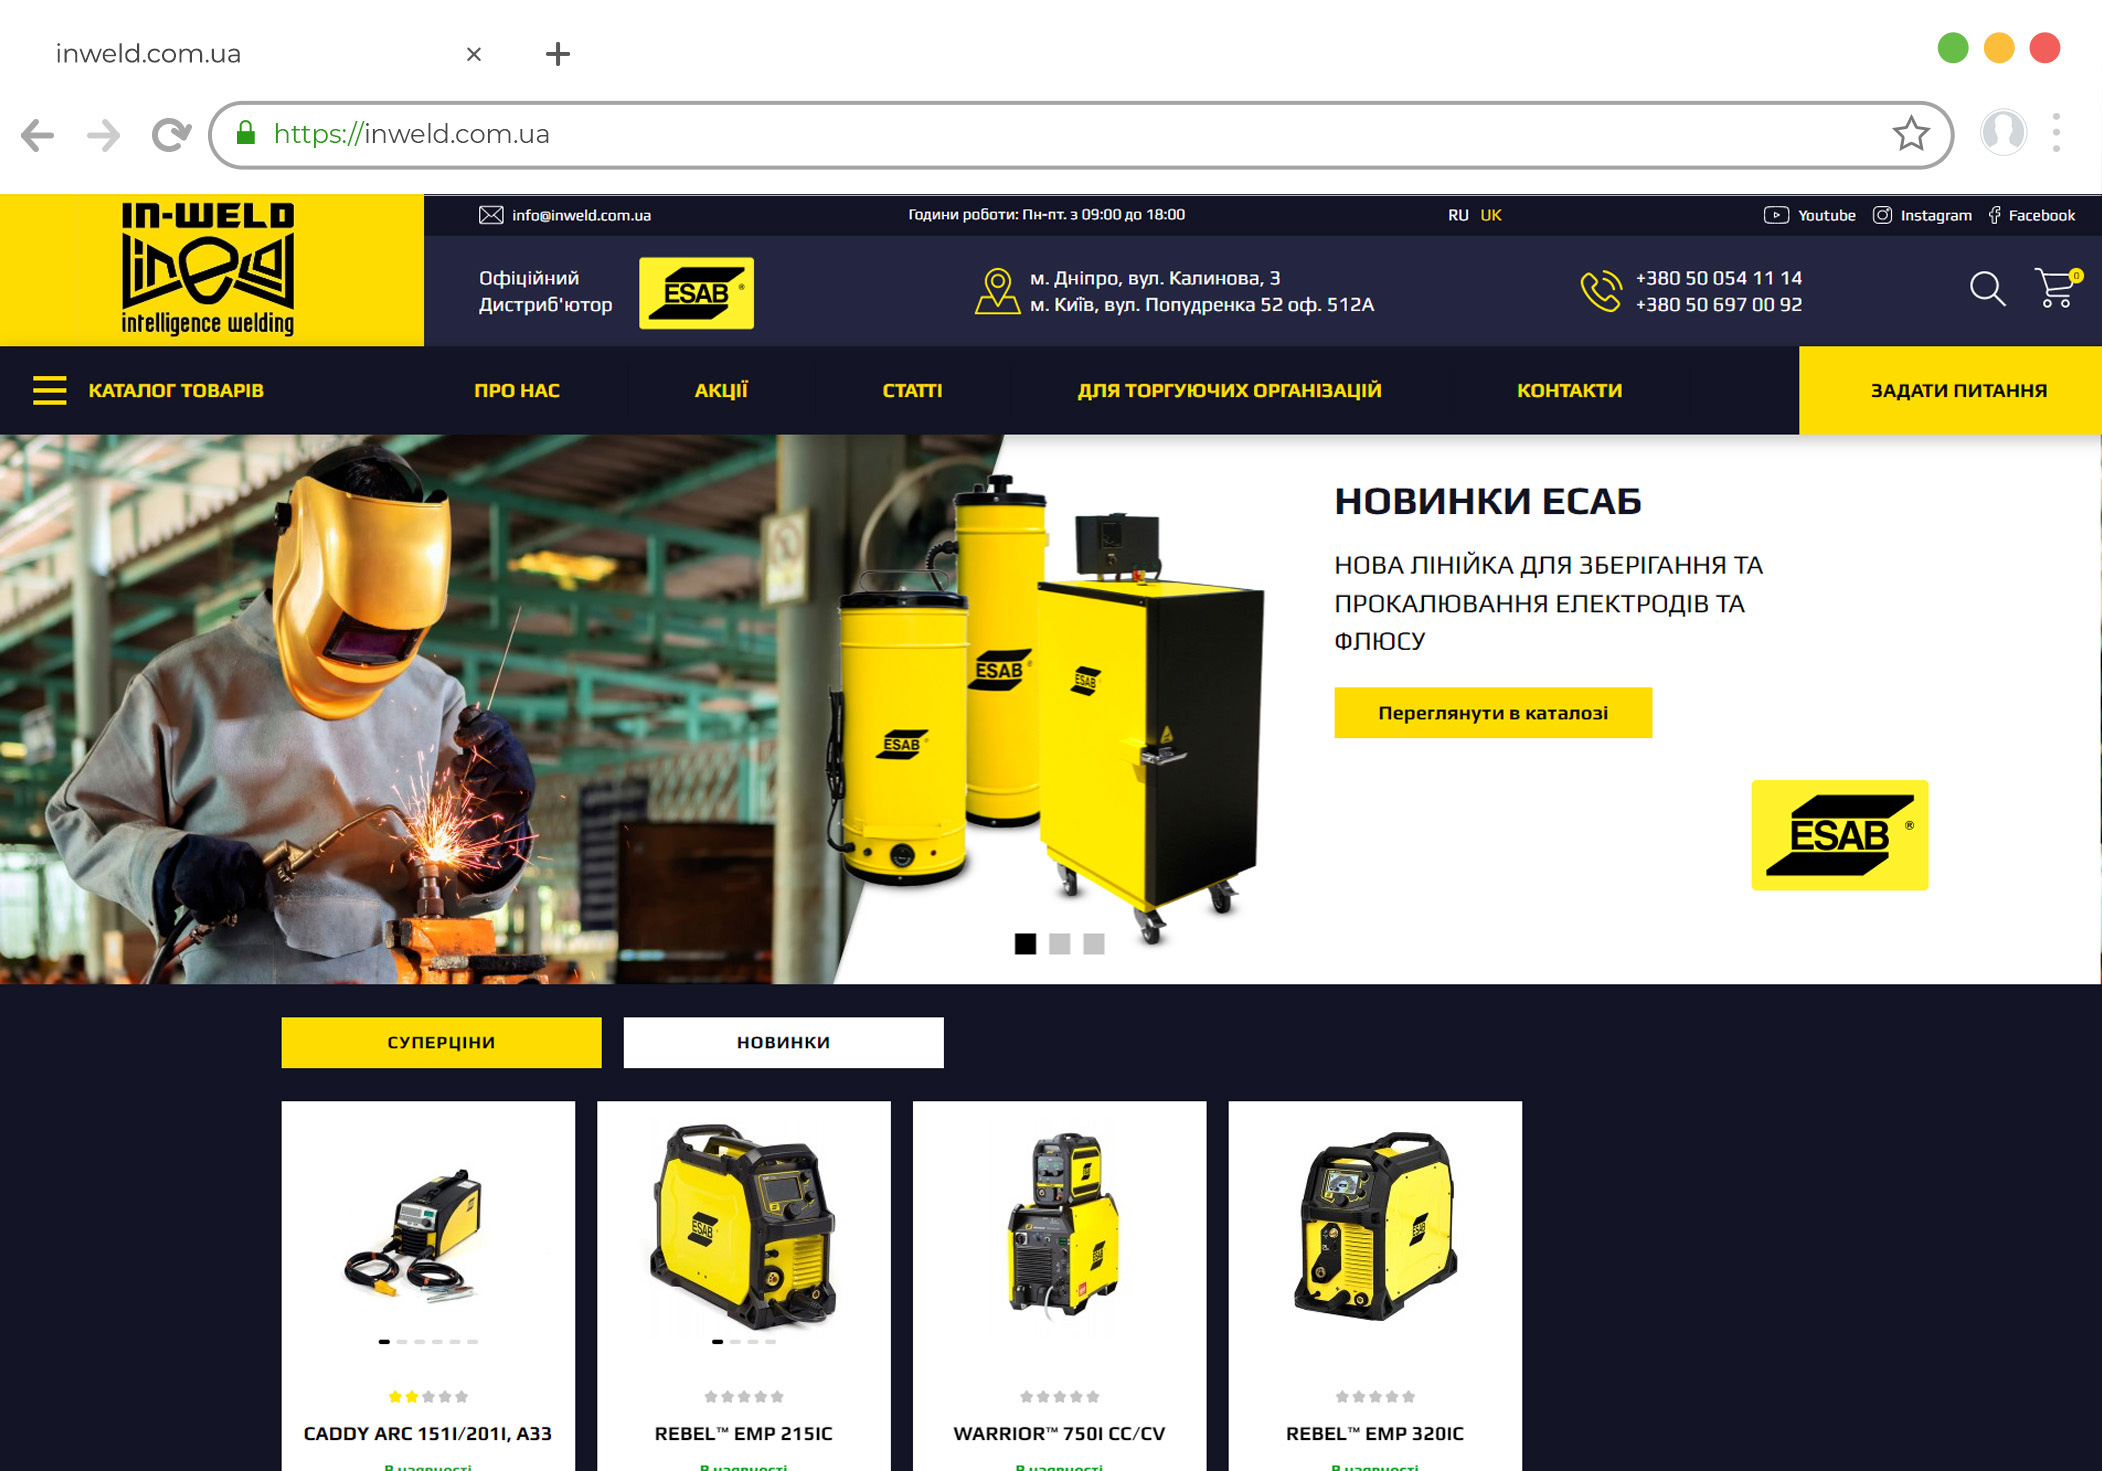 Creating an online store is all about welding